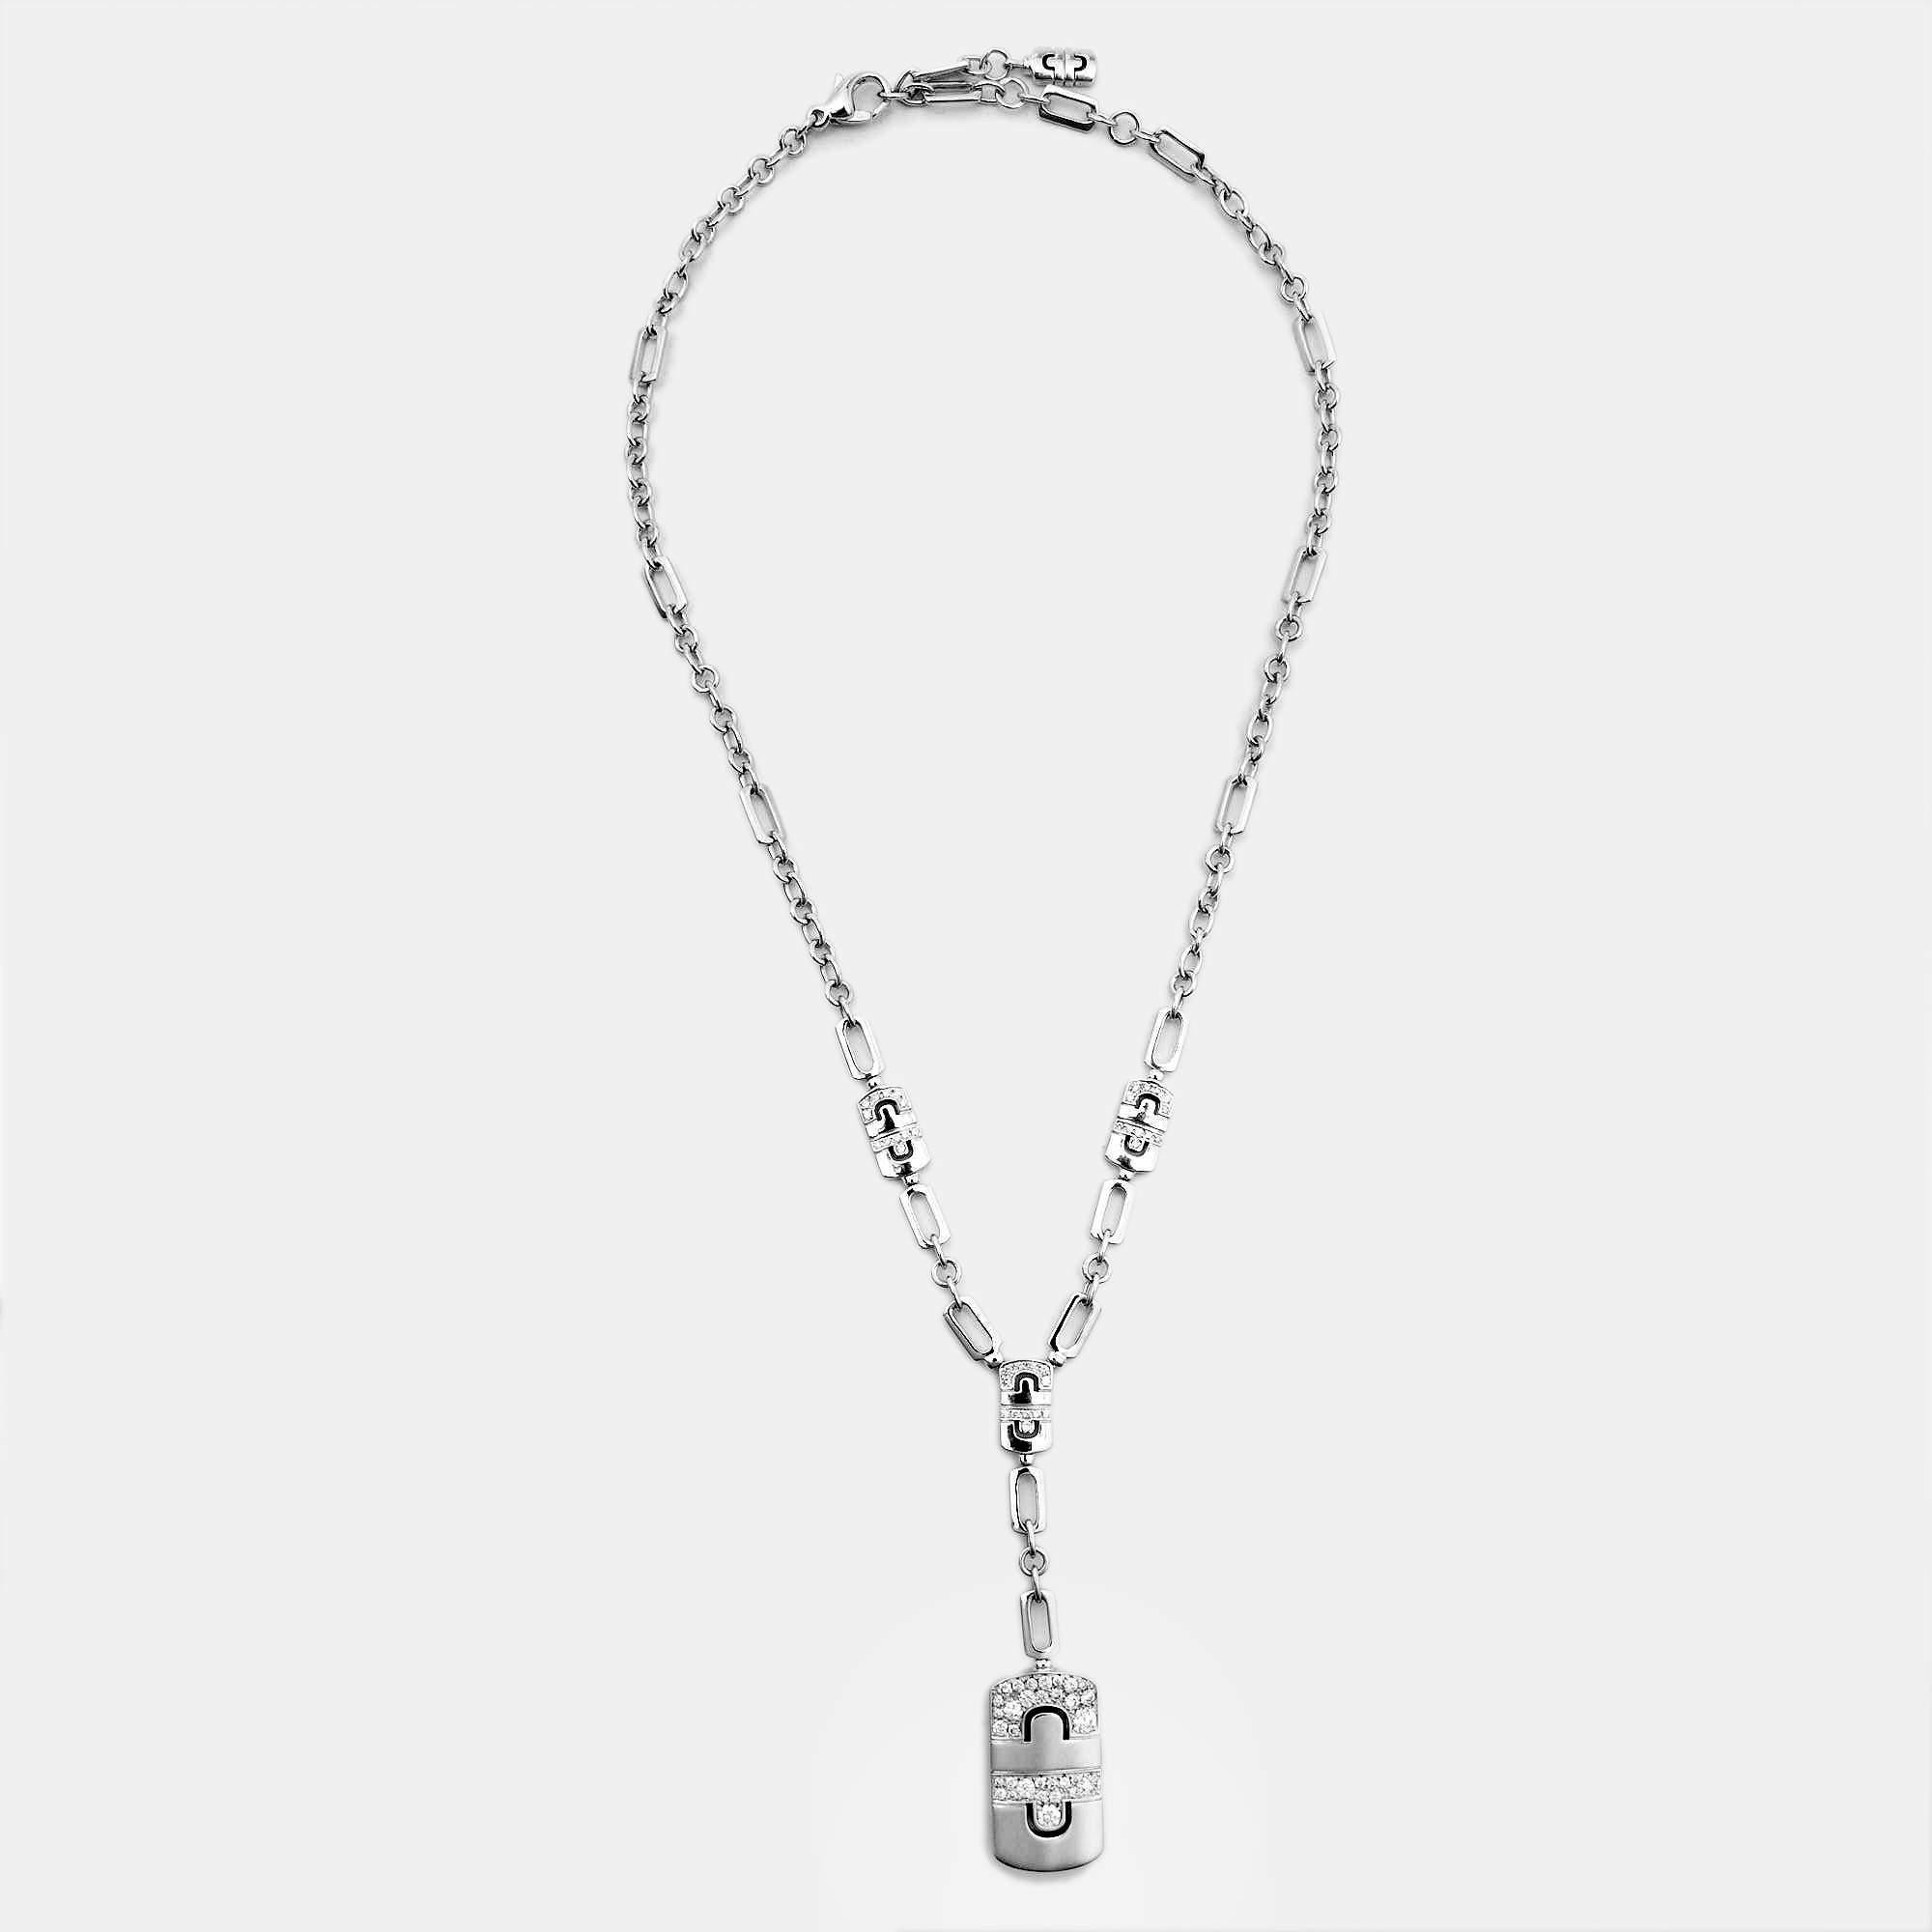 Crafted with meticulous artistry, the Bvlgari Parentesi necklace exudes timeless allure. Fashioned from 18k white gold, its intricate design captivates with delicate sophistication. Each diamond intricately set, creating a radiant mosaic. A symbol